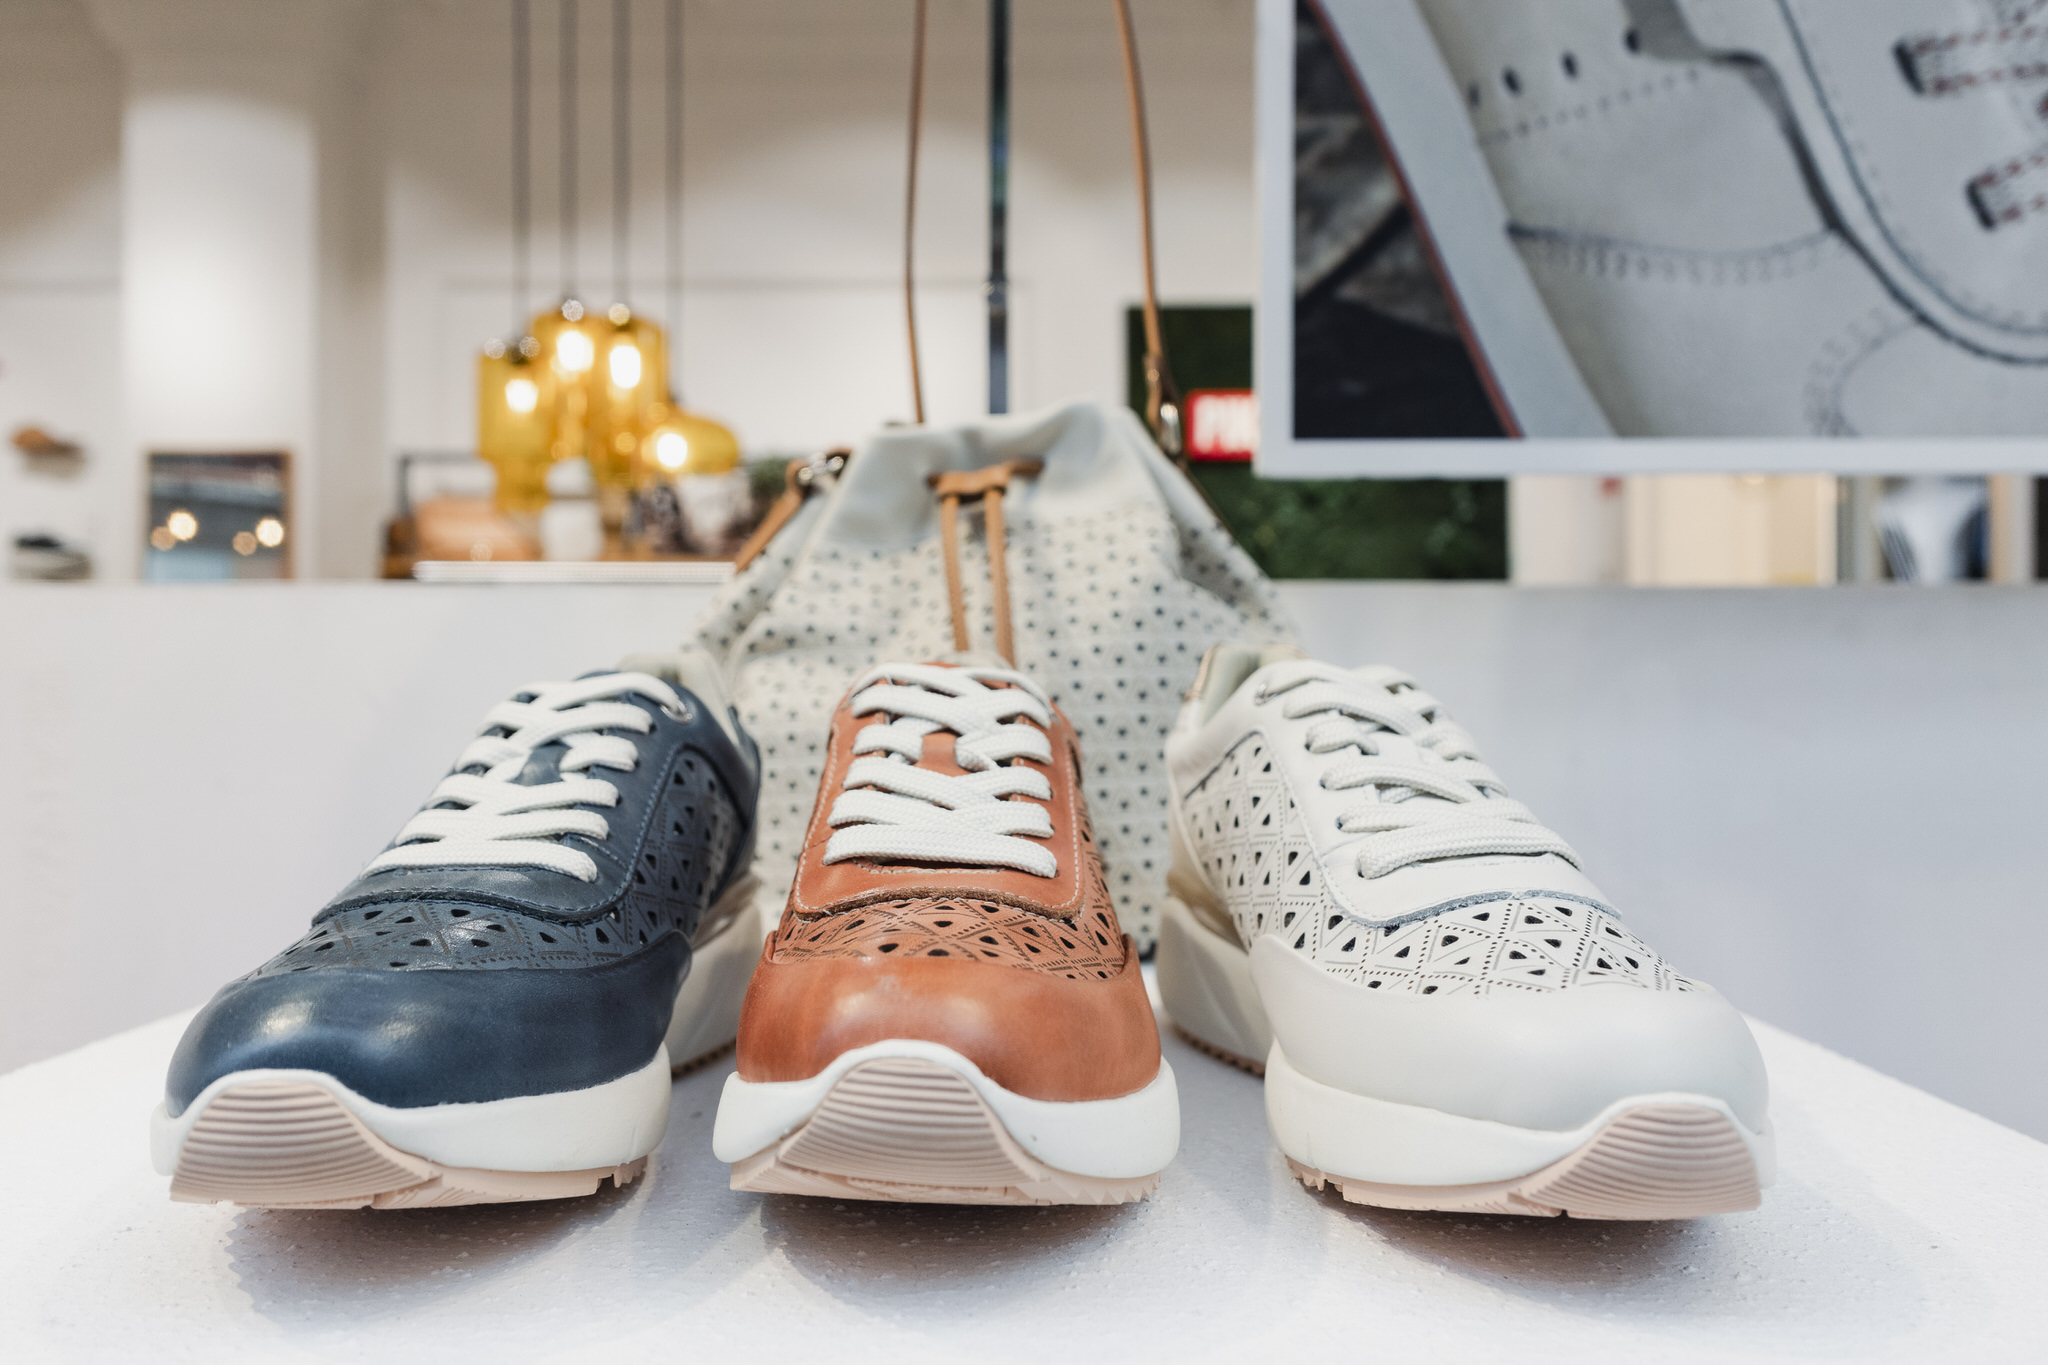 Photograph of several Pikolinos women's sneakers from the Pikolinos Mallorca store